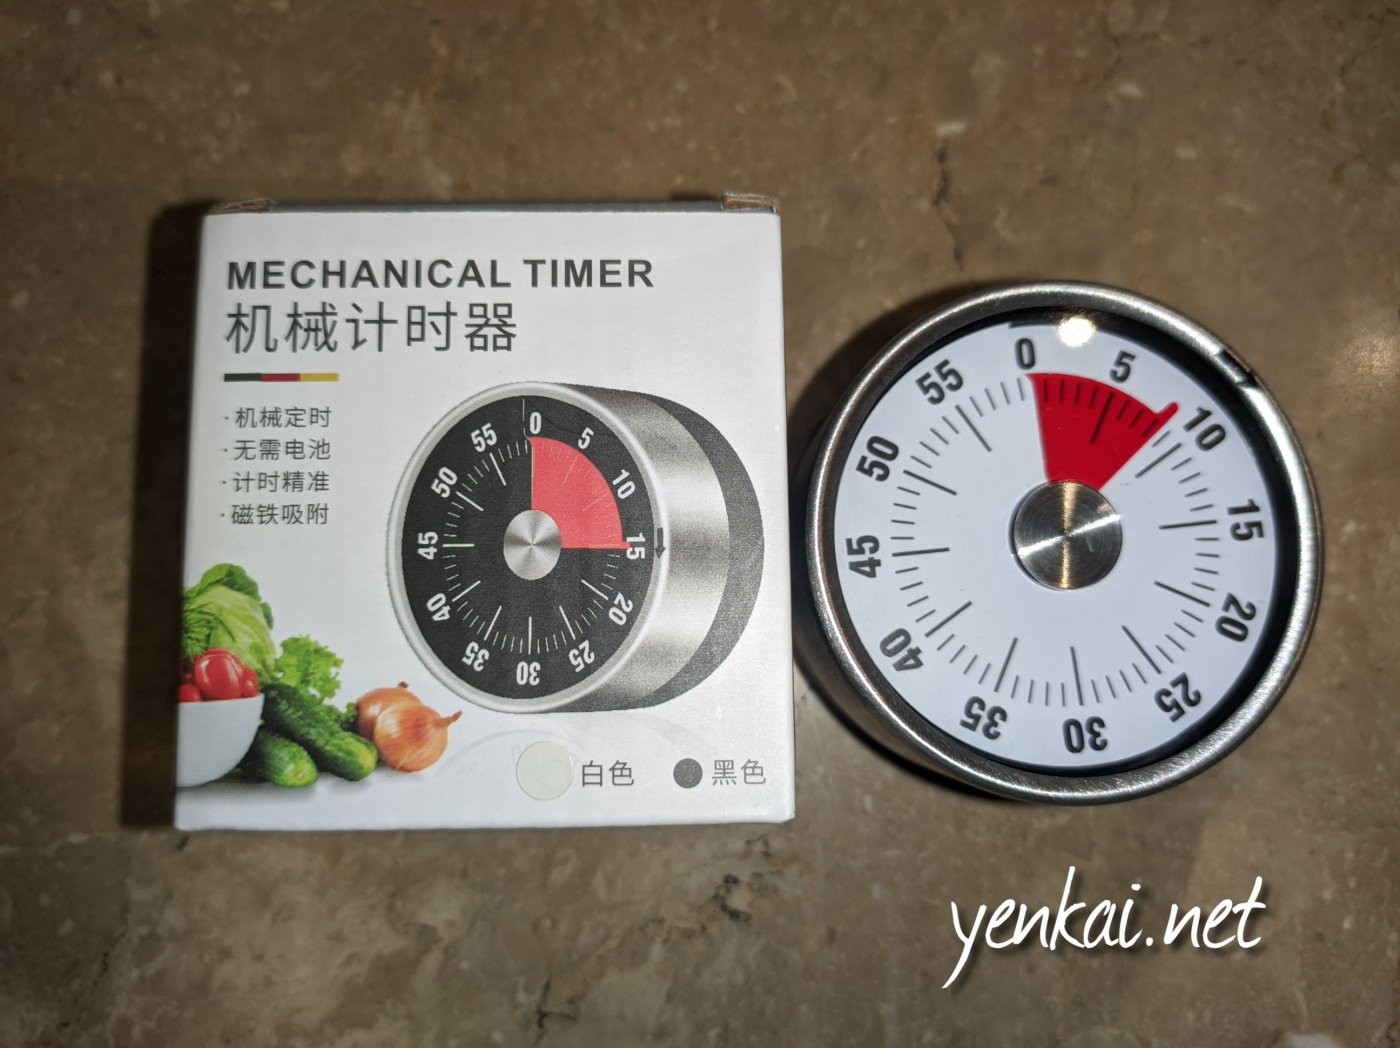 Taobao product recommendation – Mechanical timer